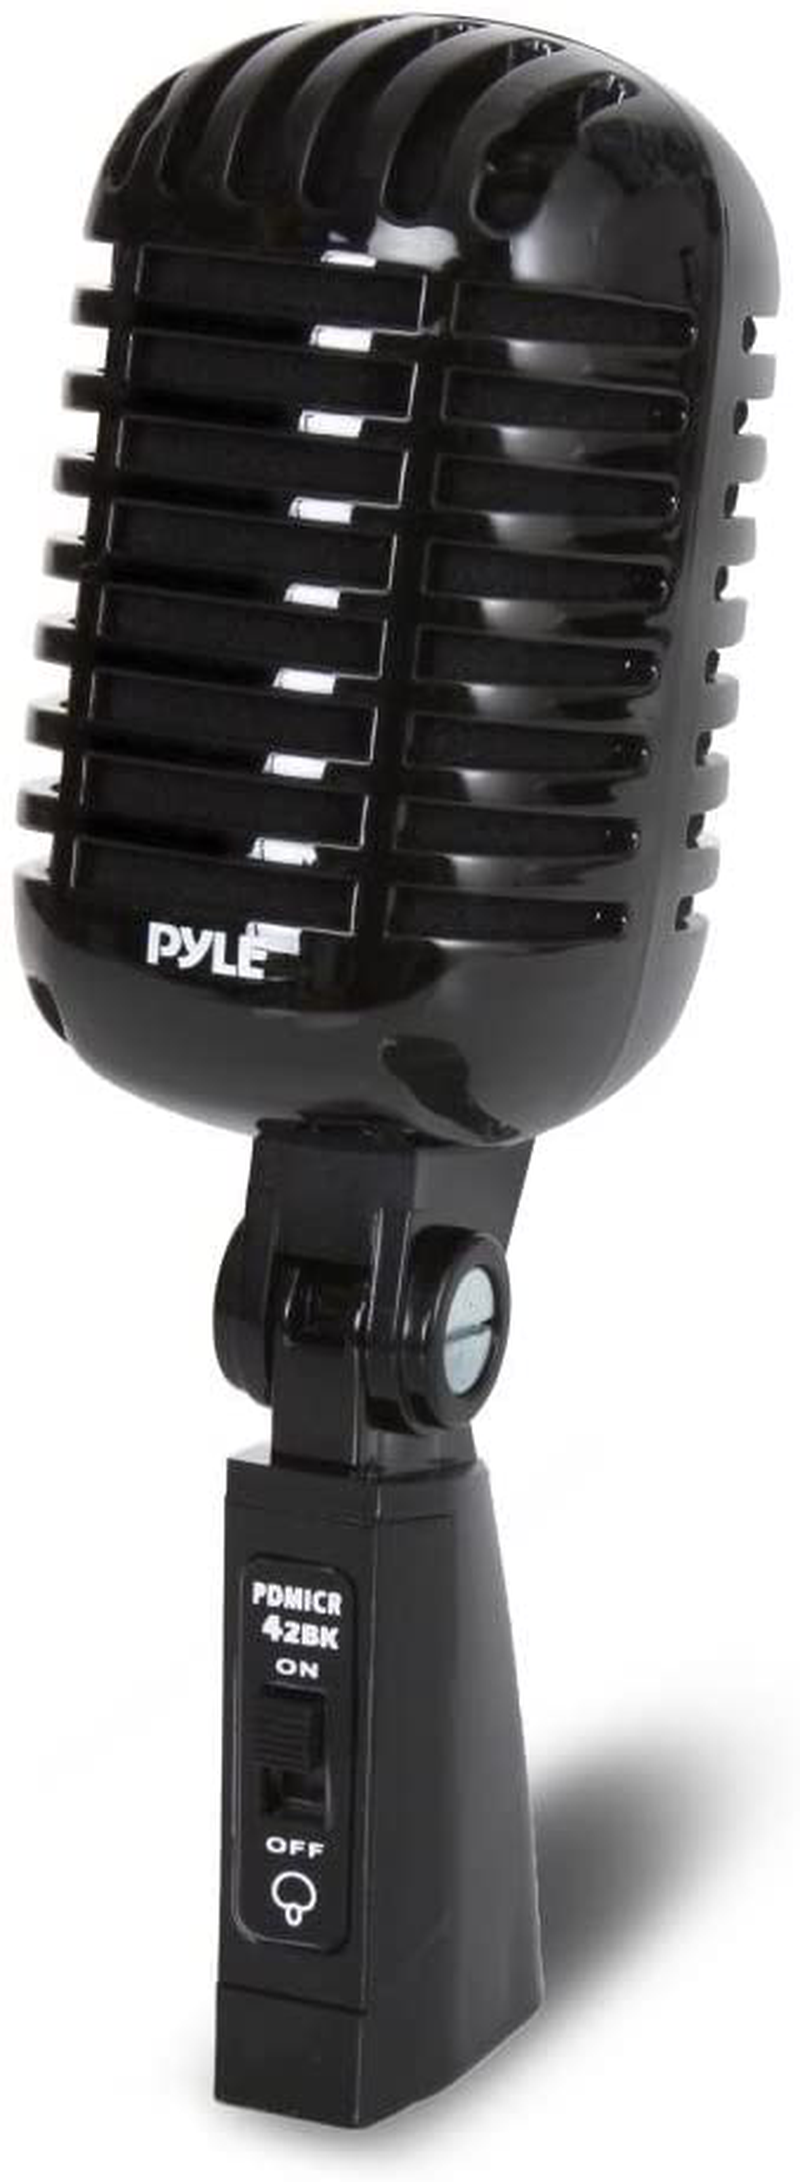 Classic Retro Dynamic Vocal Microphone - Old Vintage Style Unidirectional Cardioid Mic with XLR Cable - Universal Stand Compatible - Live Performance In Studio Recording - Pyle PDMICR42SL (Silver) Electronics > Audio > Audio Components > Microphones Pyle Black Microphone 